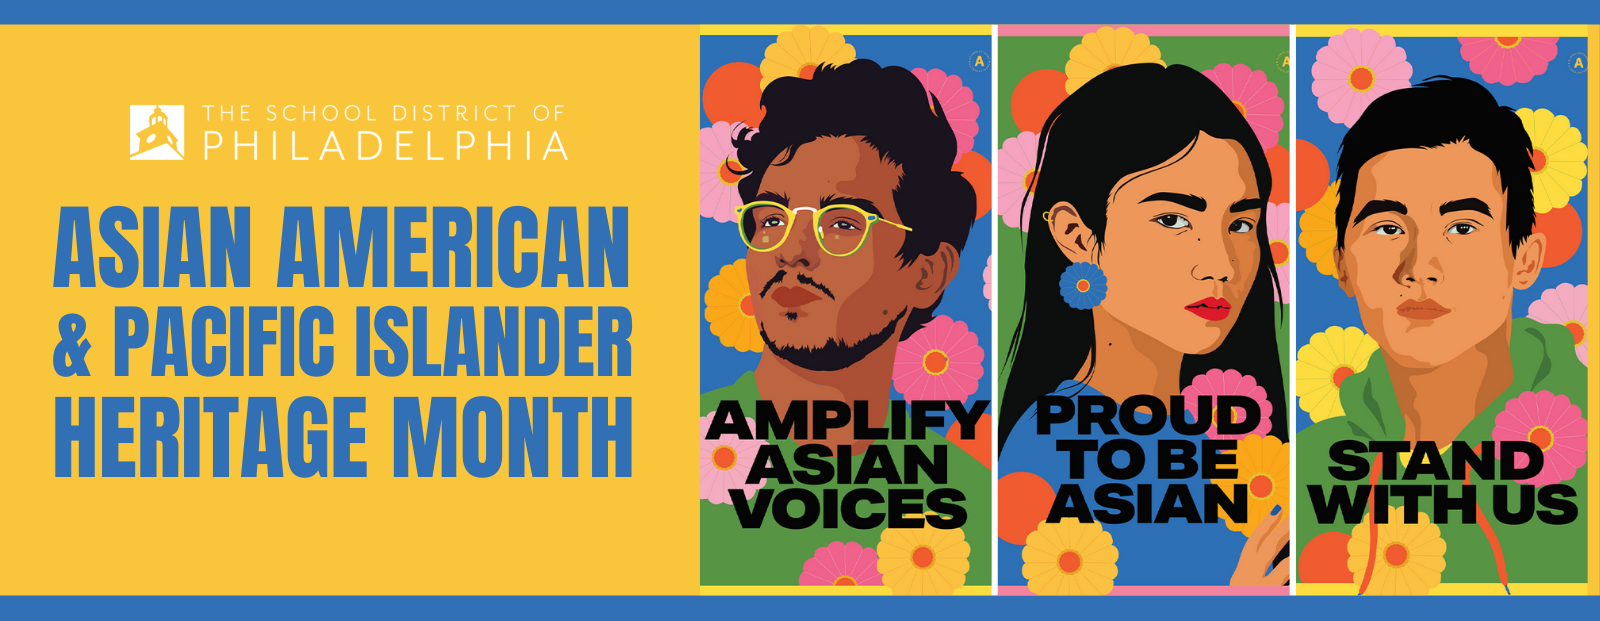 Amplify Asian voices. Proud to be Asian. Stand with us.